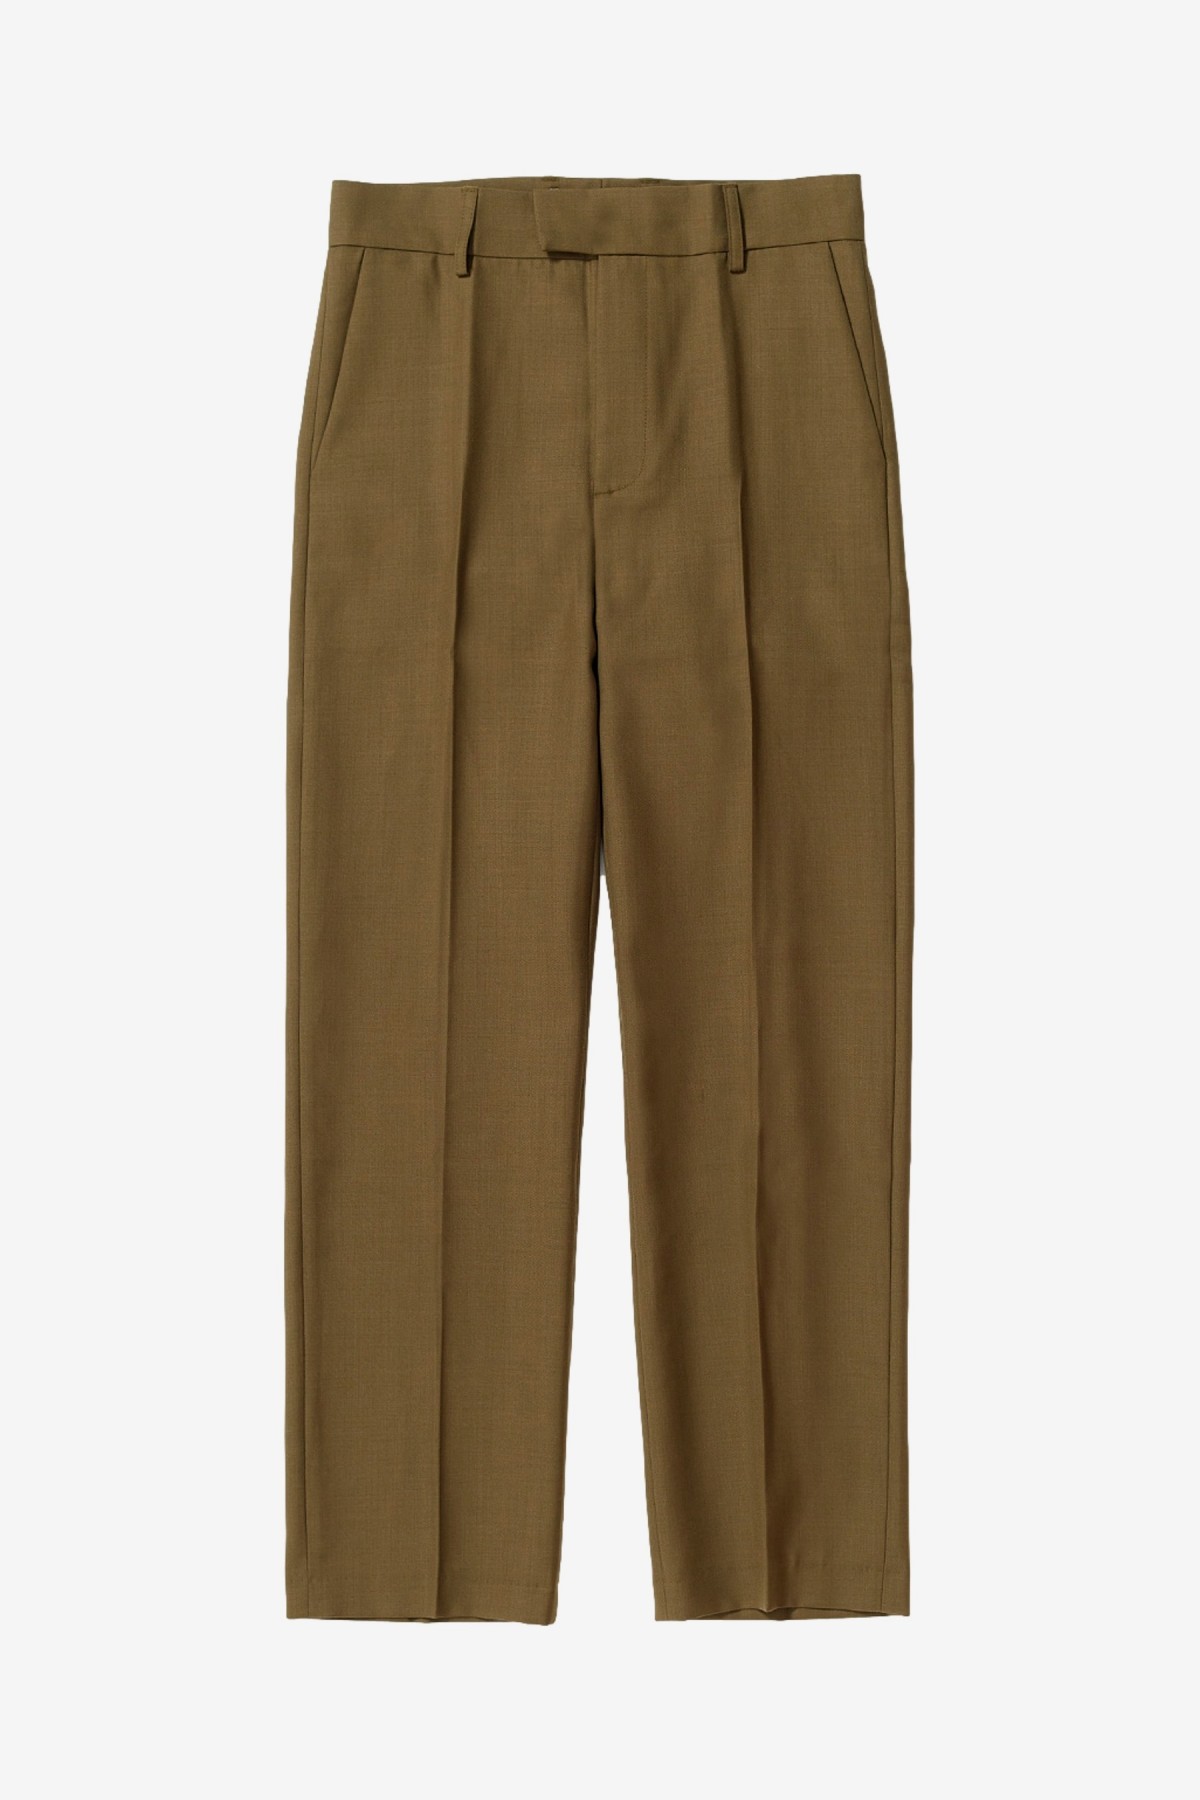 Séfr Mike Suit Trouser in Acadia Green